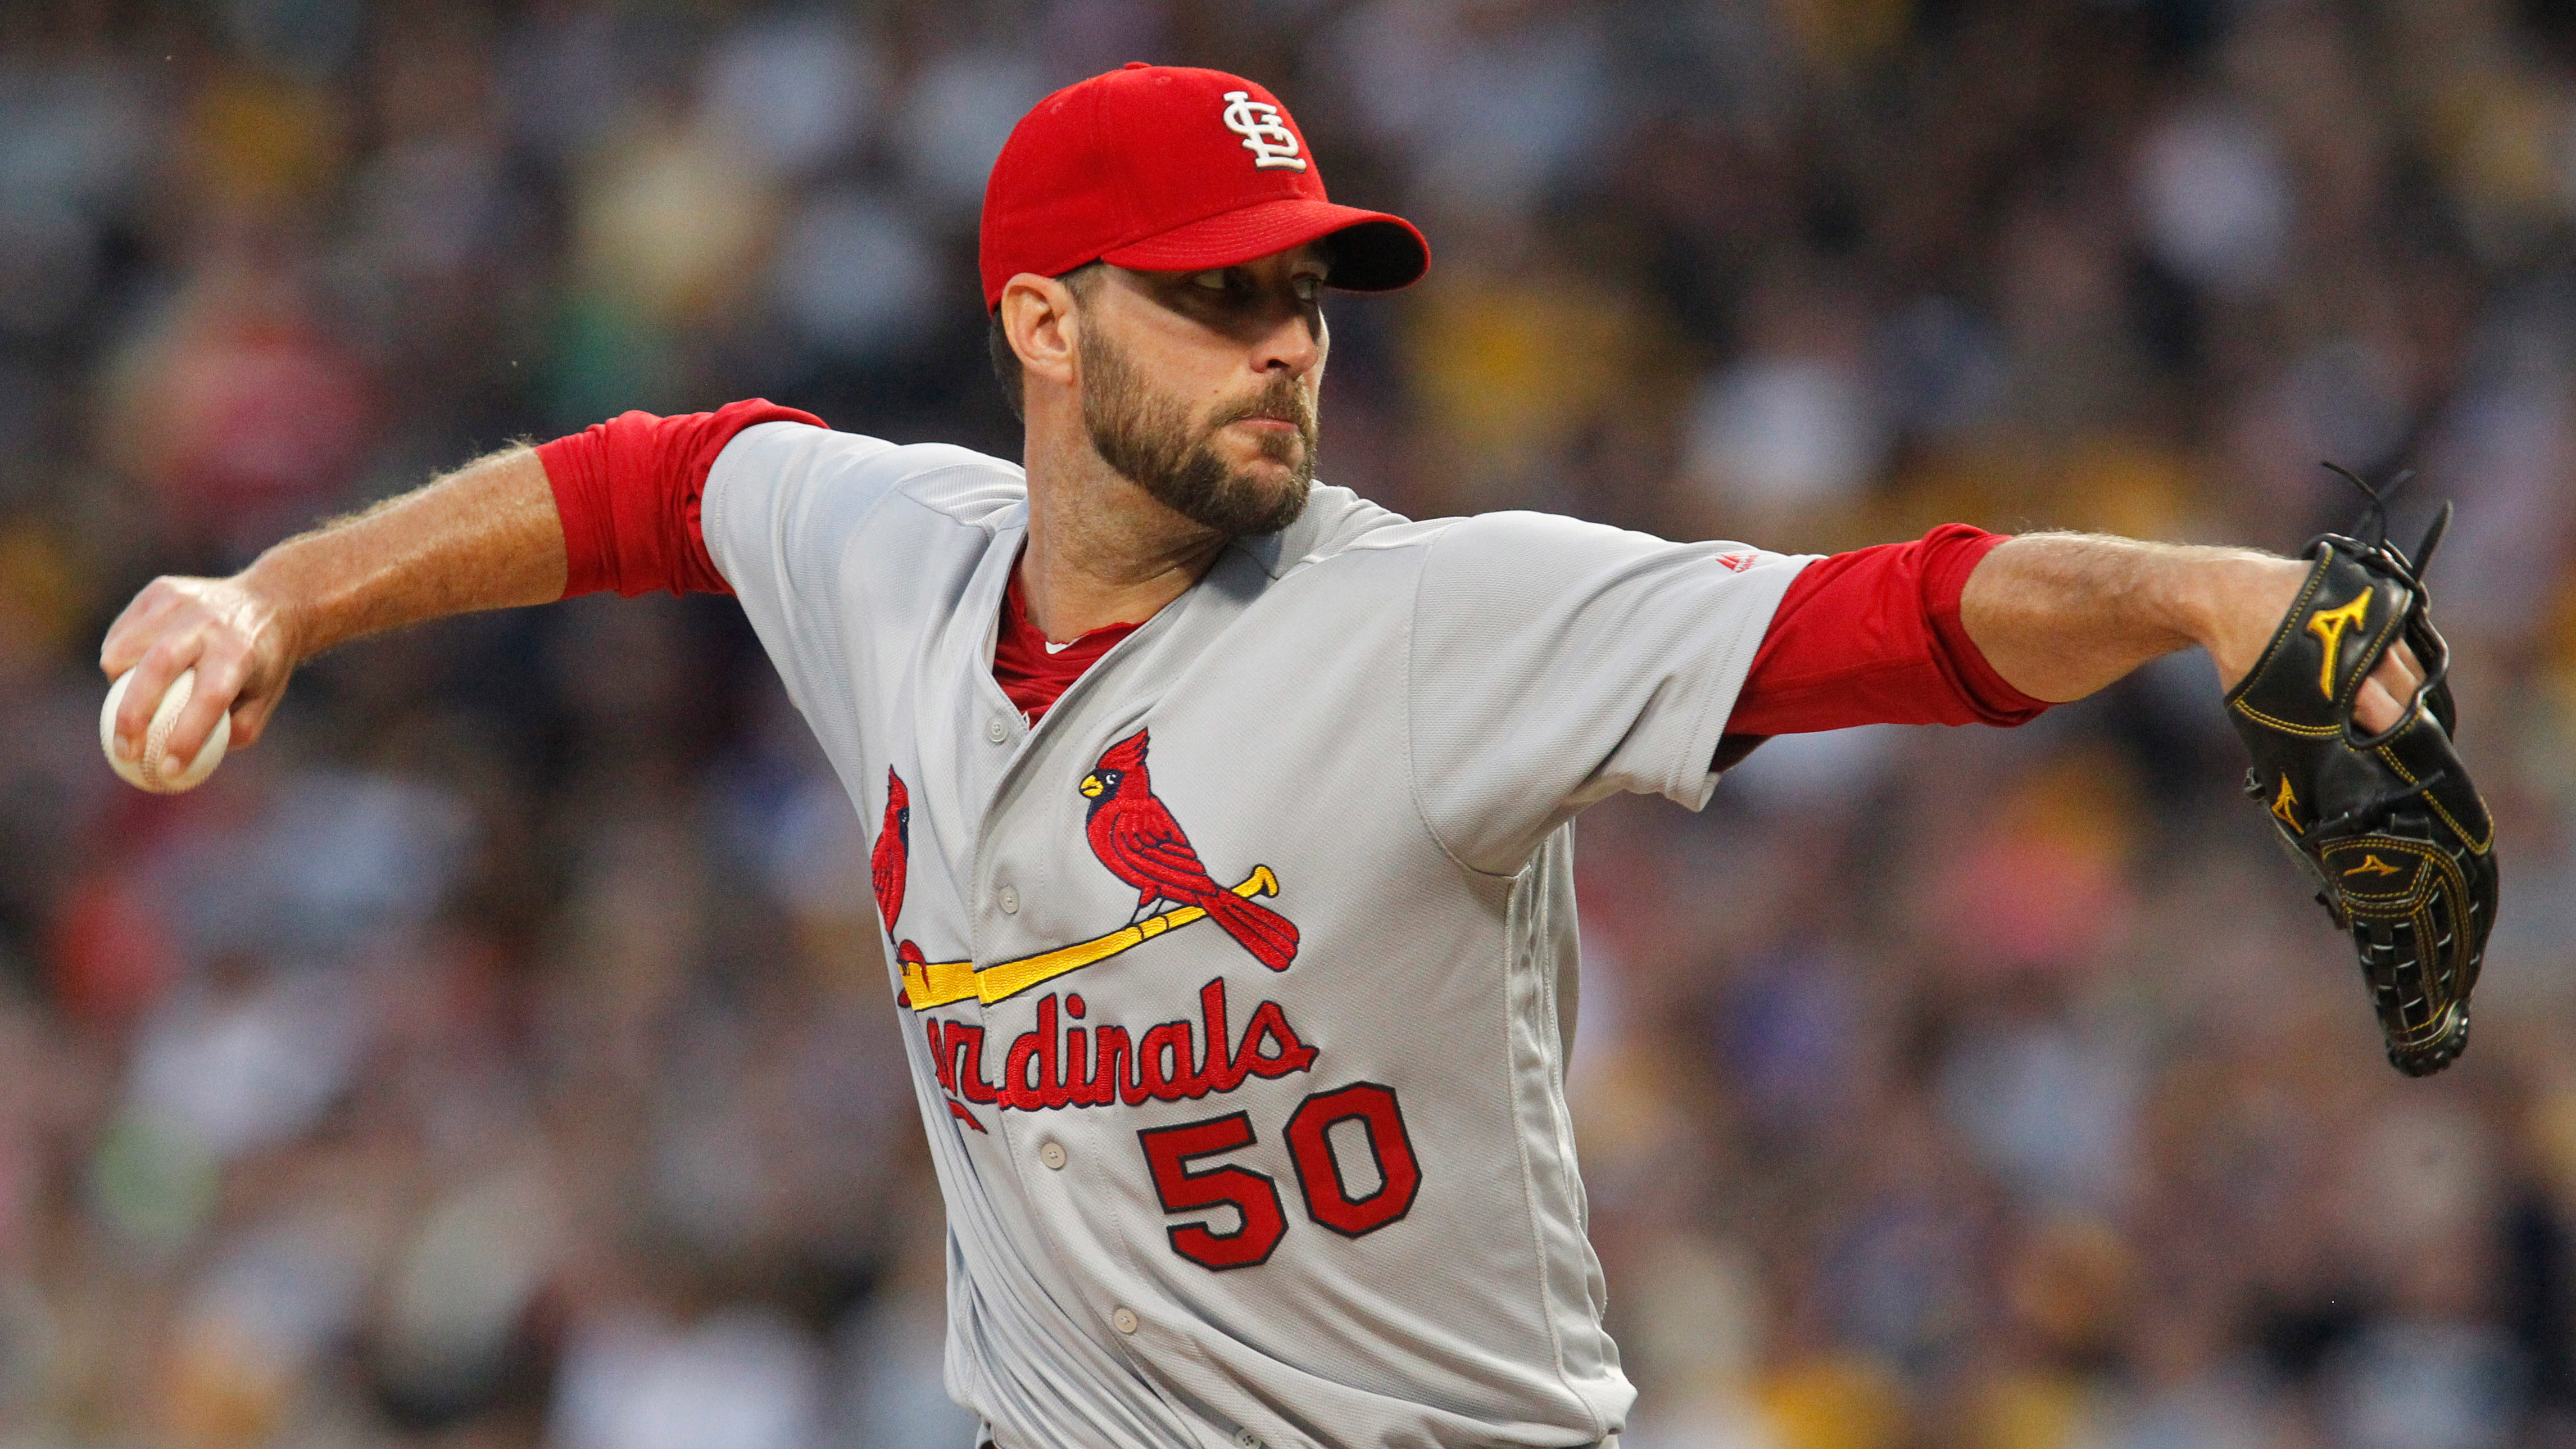 Wainwright figures to be important piece of Cardinals' success this season